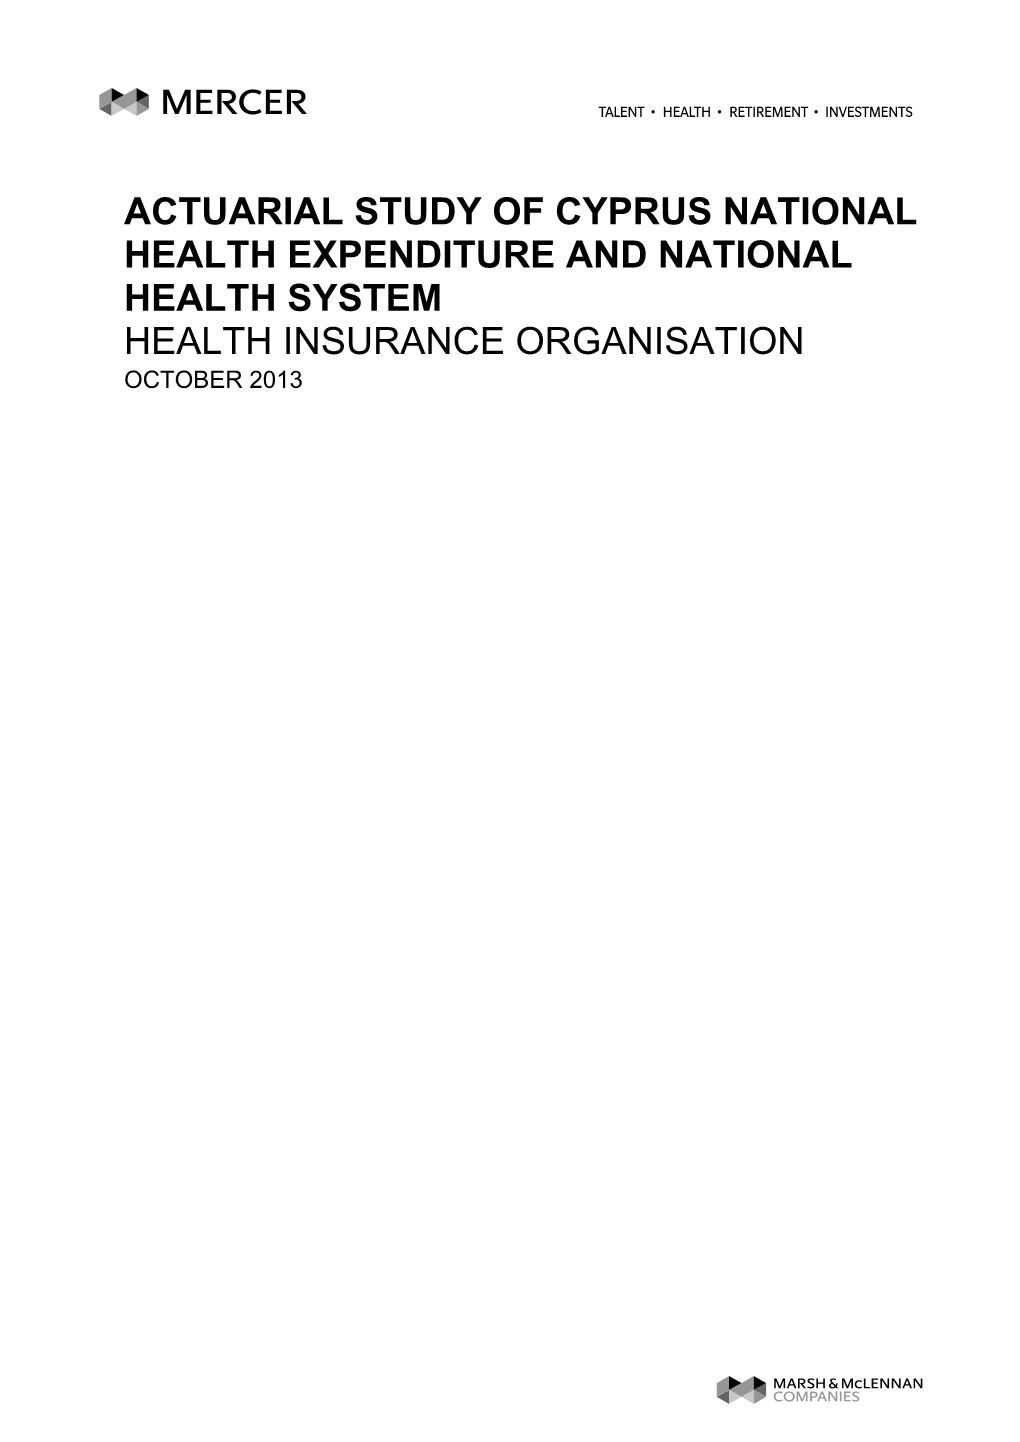 Actuarial Study of Cyprus National Health Expenditure and National Health System Health Insurance Organisation October 2013